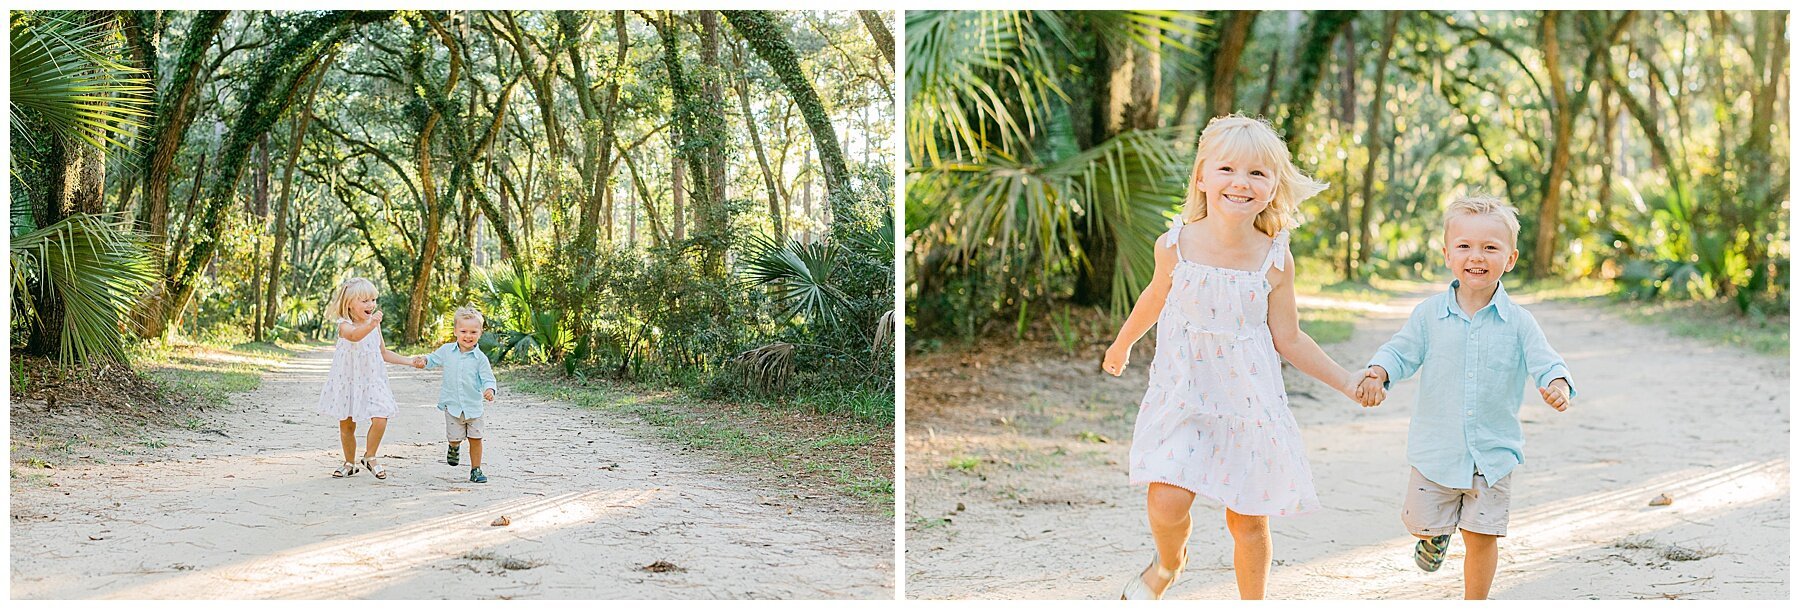 Katherine_Ives_Photography_Mcmillen_Montage_Palmetto_Bluff_11.jpg